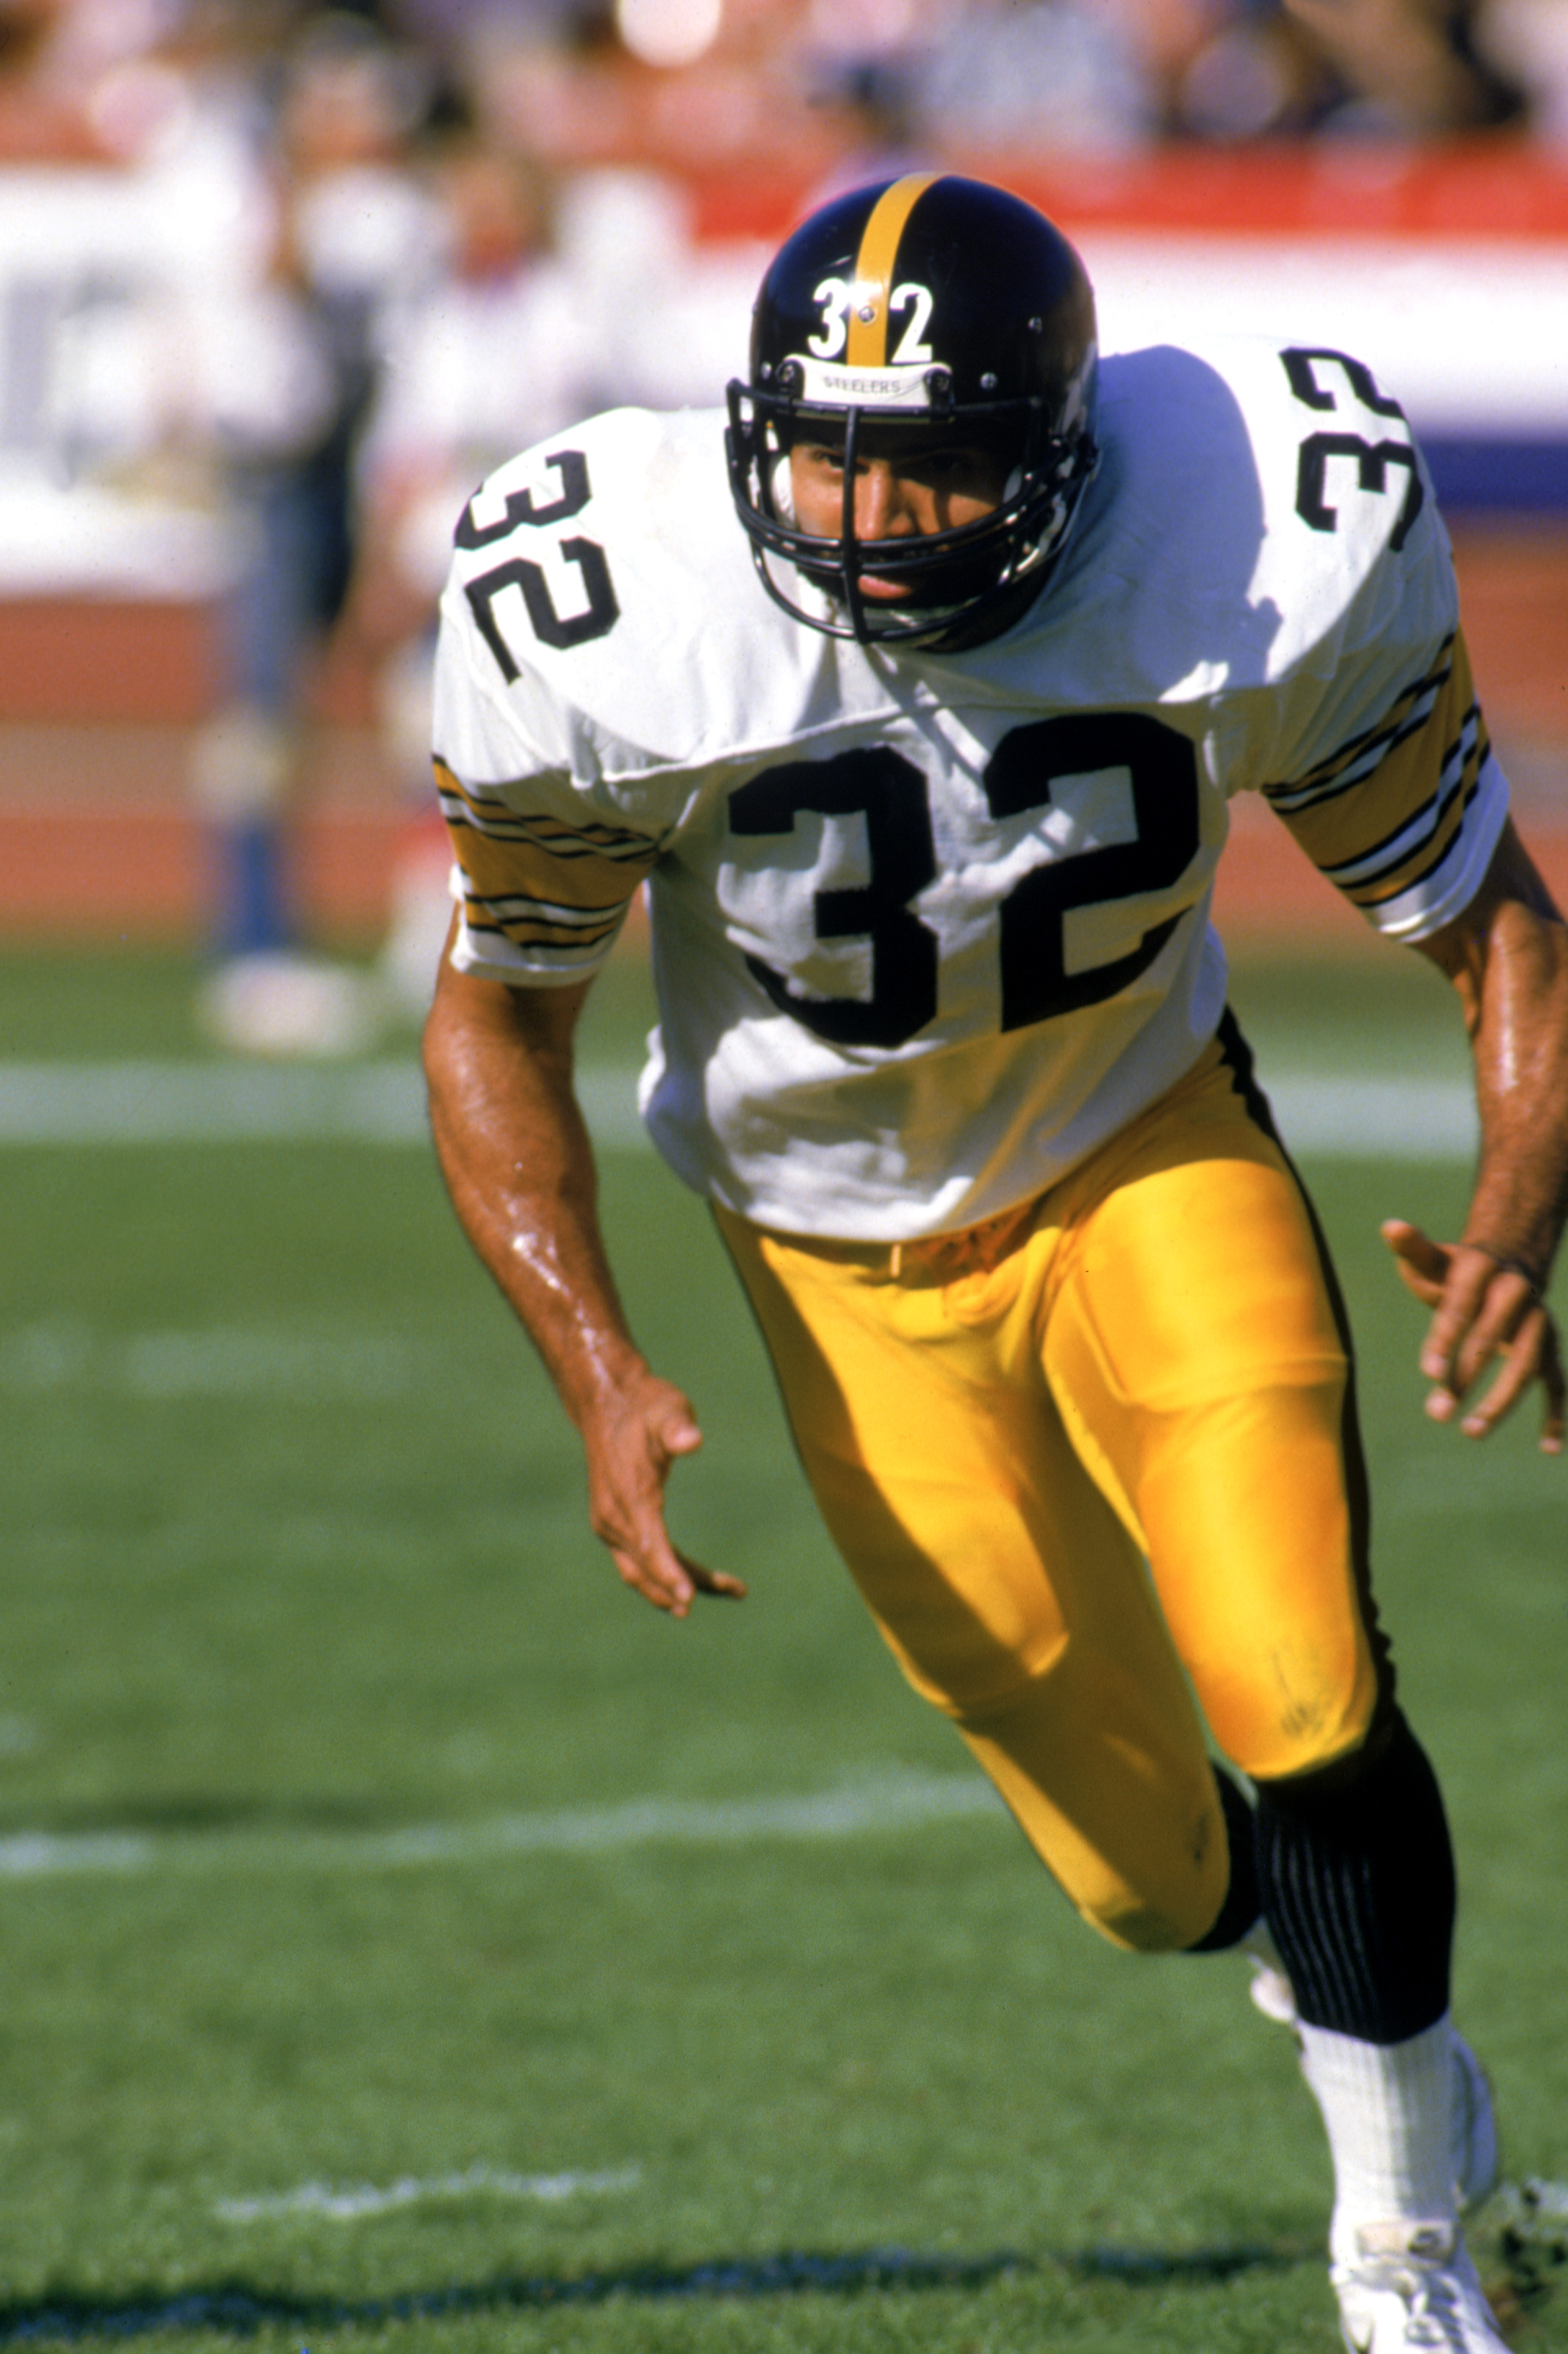 1984:  Running back Franco Harris #32 of the Pittsburgh Steelers runs during a game in the 1984 NFL season.  (Photo by Rick Stewart/Getty Images)